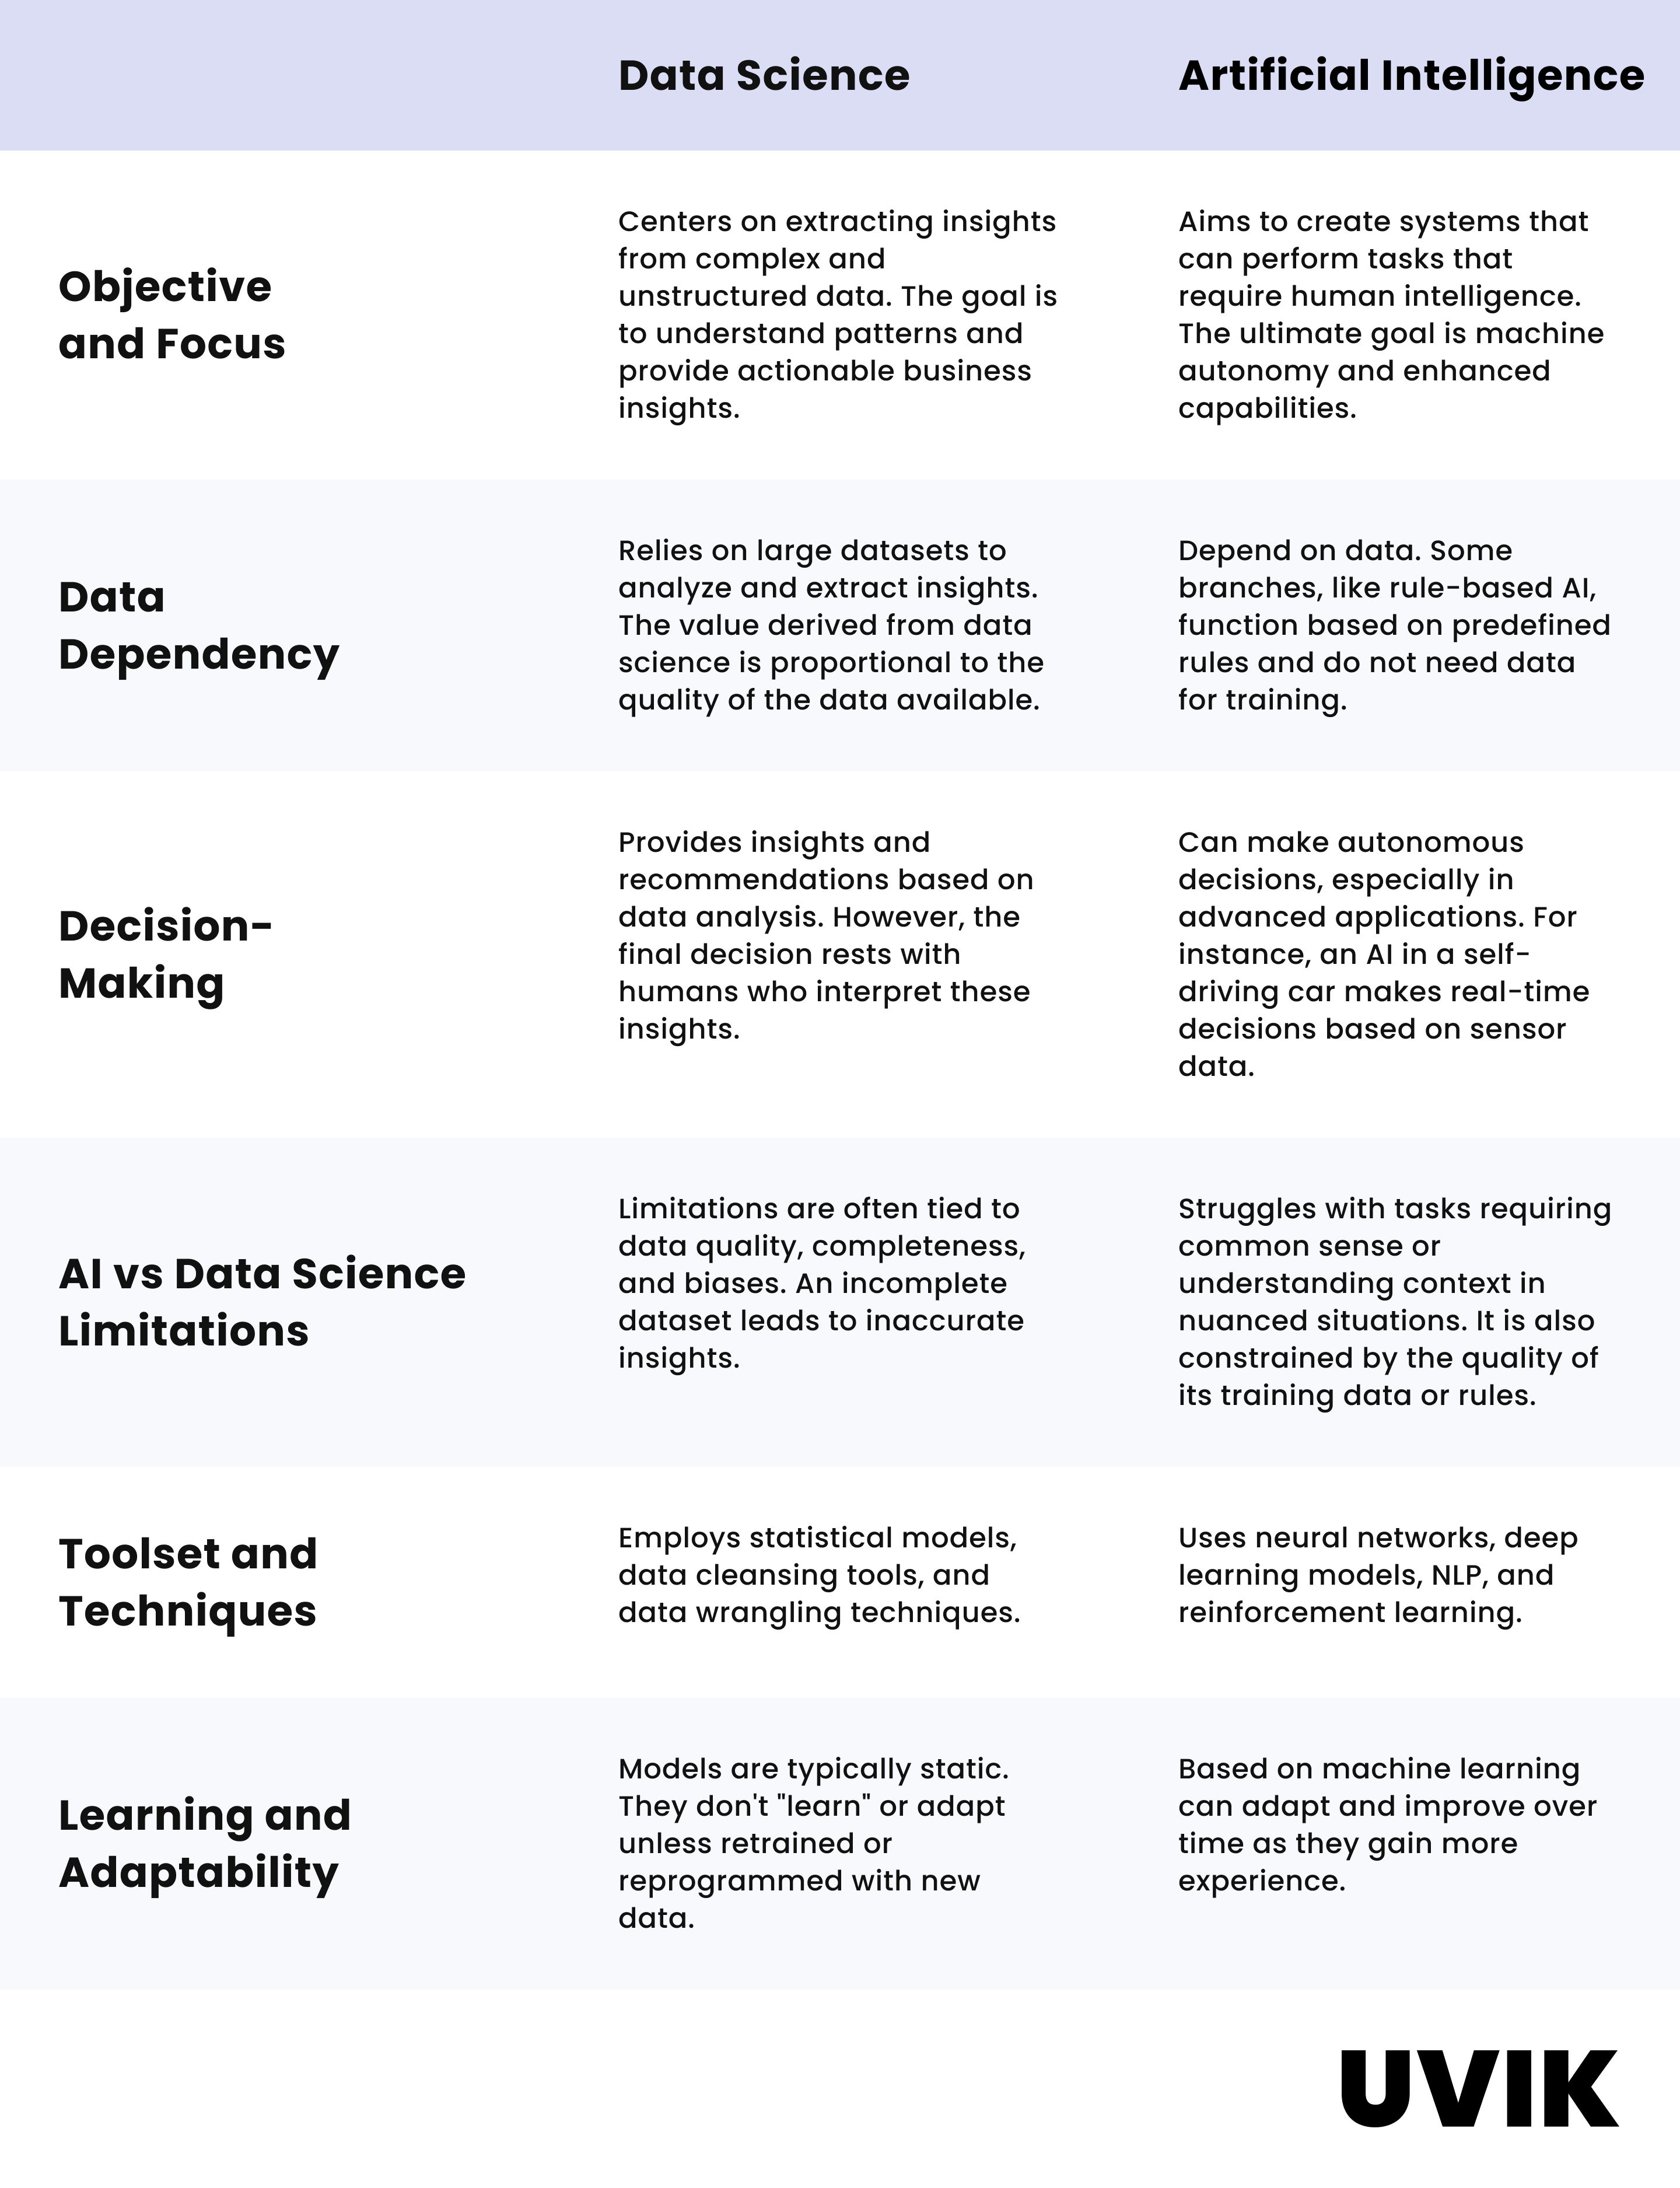 Data Science and Artificial Intelligence: The Power Duo for Technological Supremacy - 11